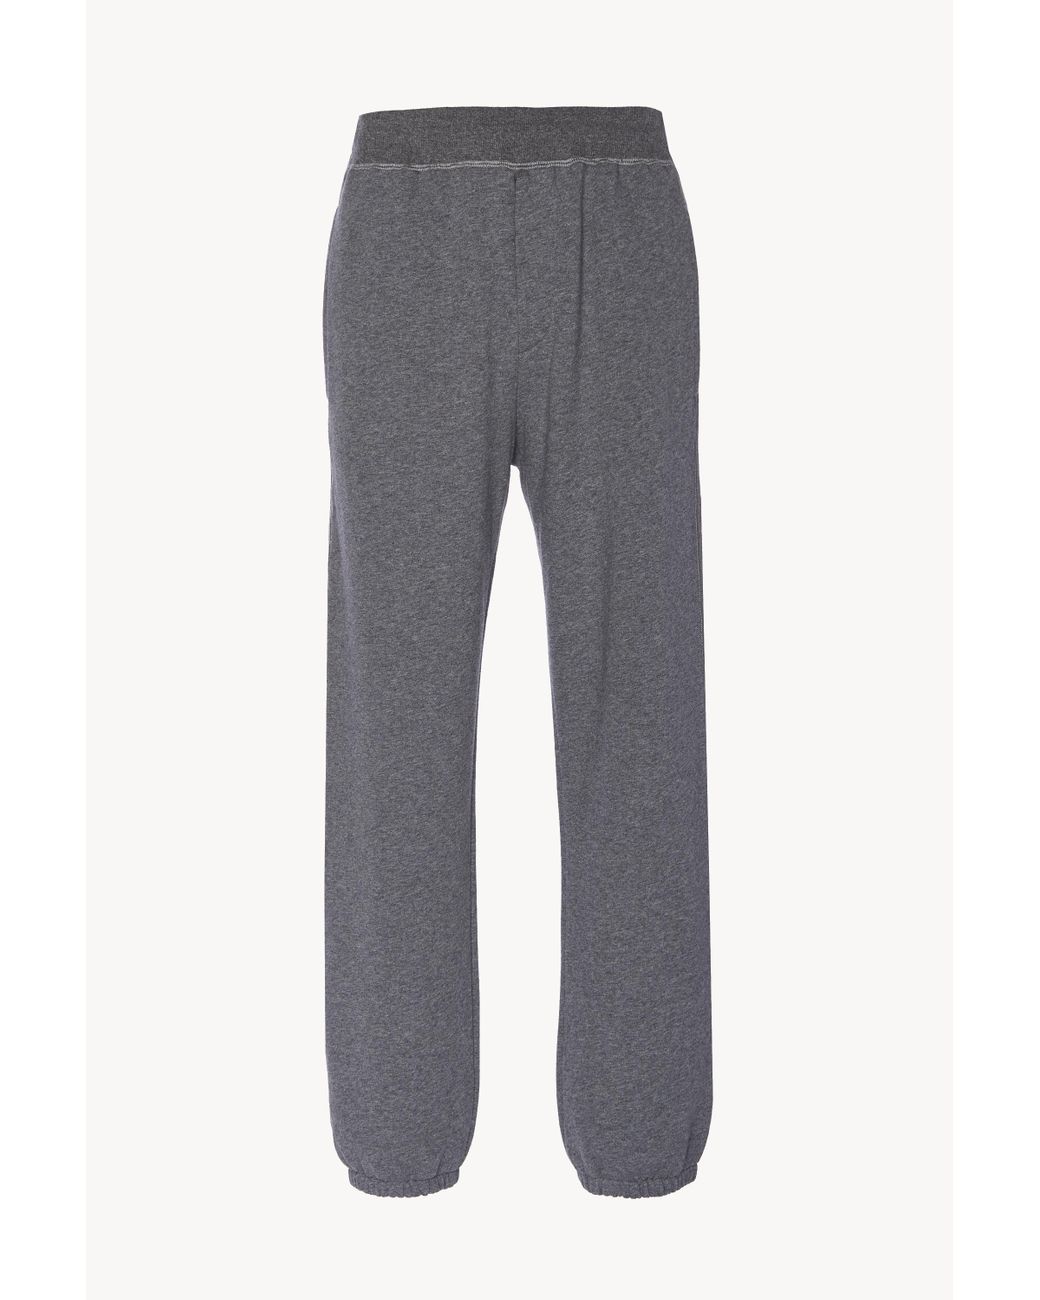 The Row Olin Jogger Pant In Cotton in Grey Melange (Gray) for Men - Lyst